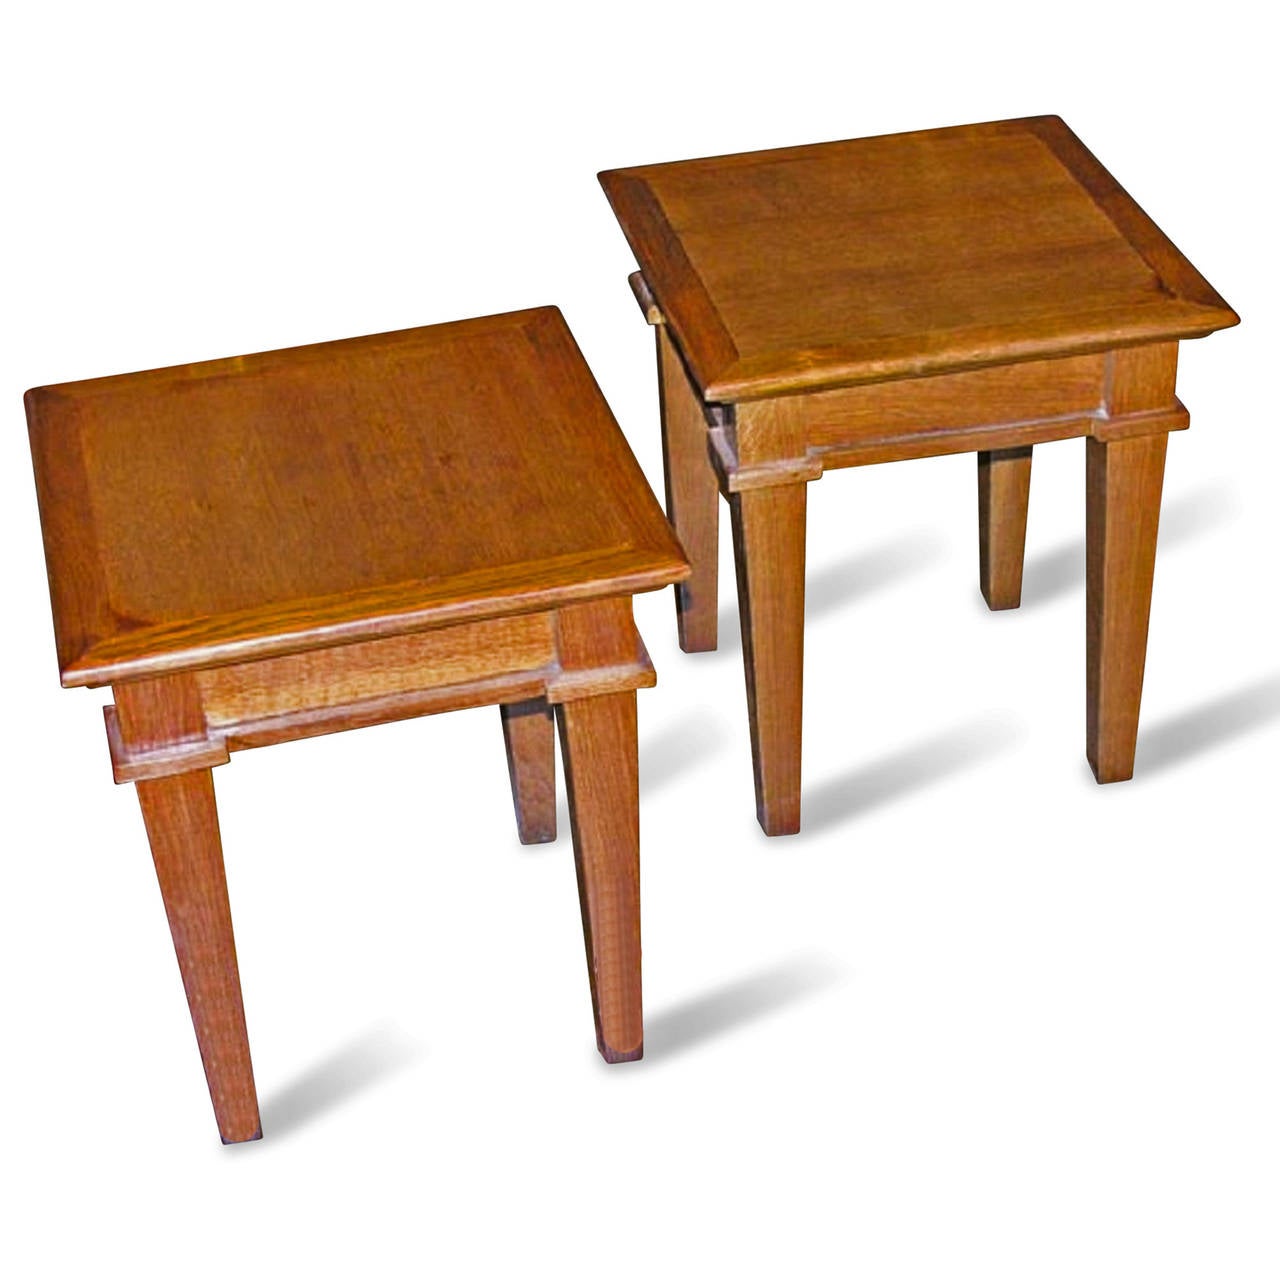 Pair of oak end tables, square form with apron and tapered square column legs, by Andre Arbus, French late 1940s. 15 1/2 in square, height 17 in.

WINTER SALE - 40% OFF - One Week Only !!

(Price shown is reduced price, no further trade